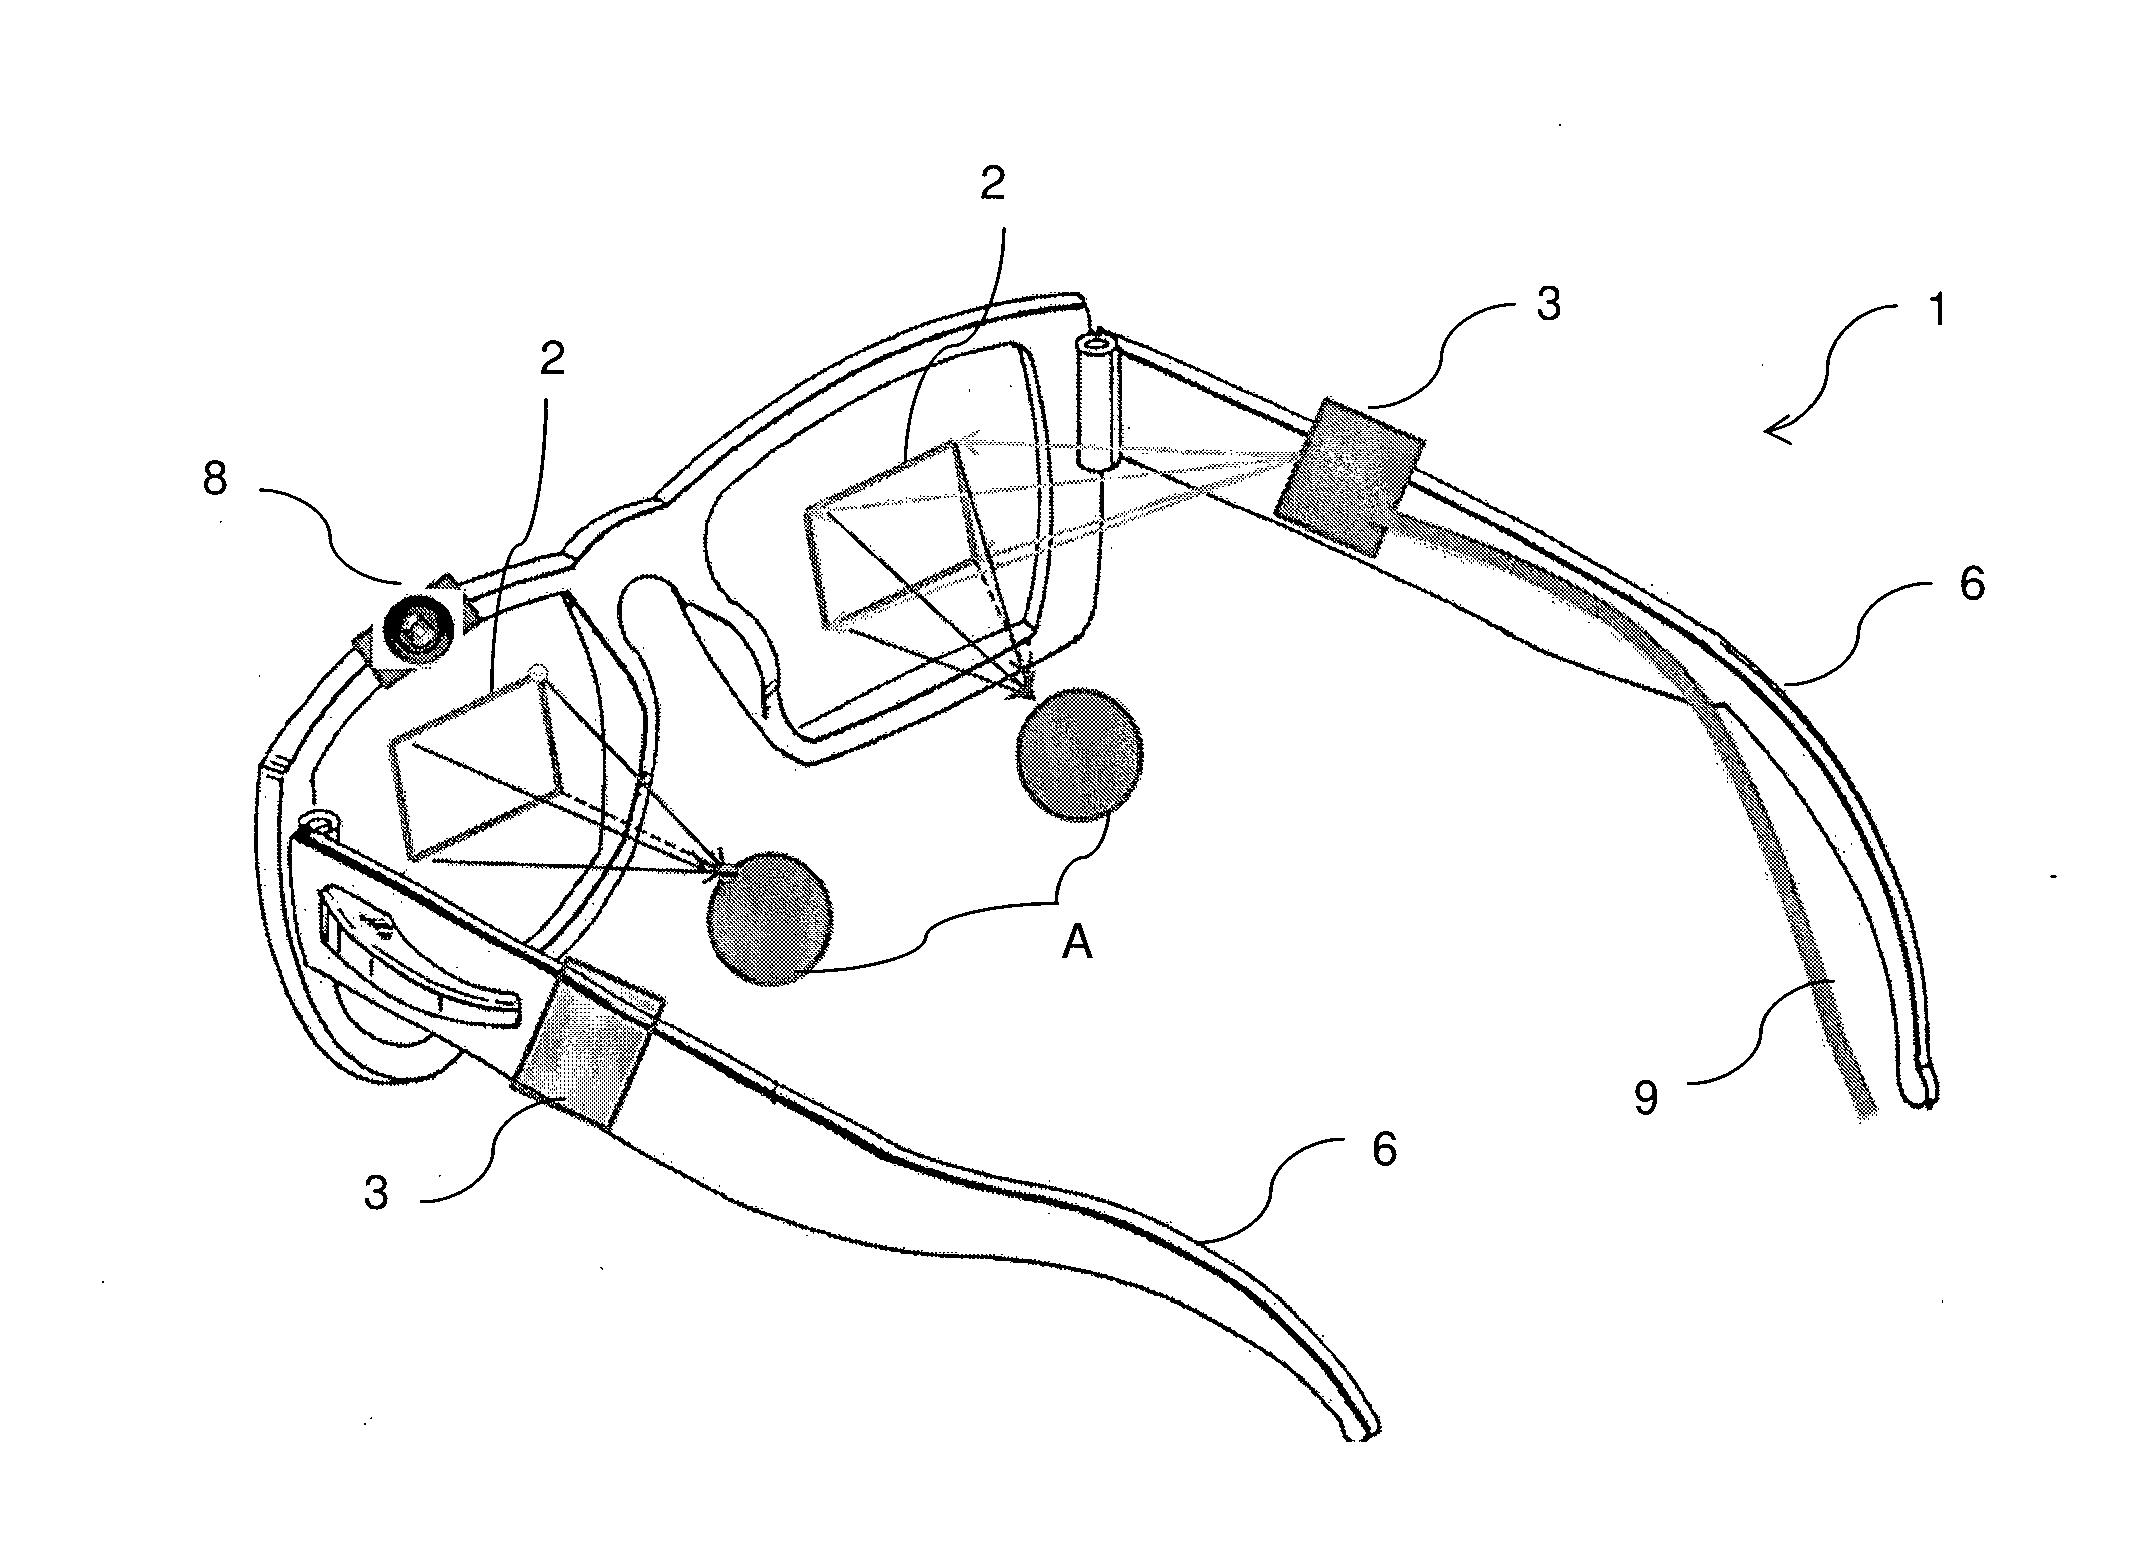 Image display device in the form of a pair of eye glasses